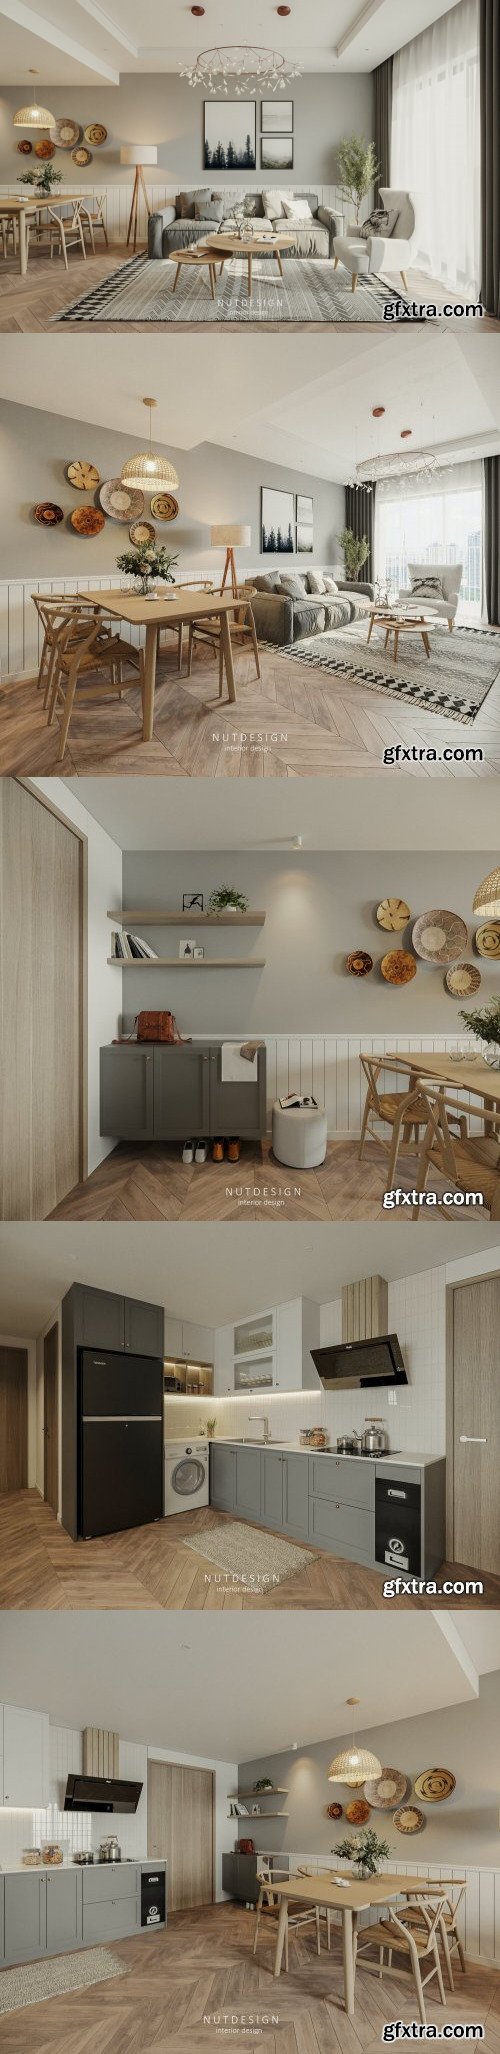 Living Room- Kitchen Interior by Hoang Thoa